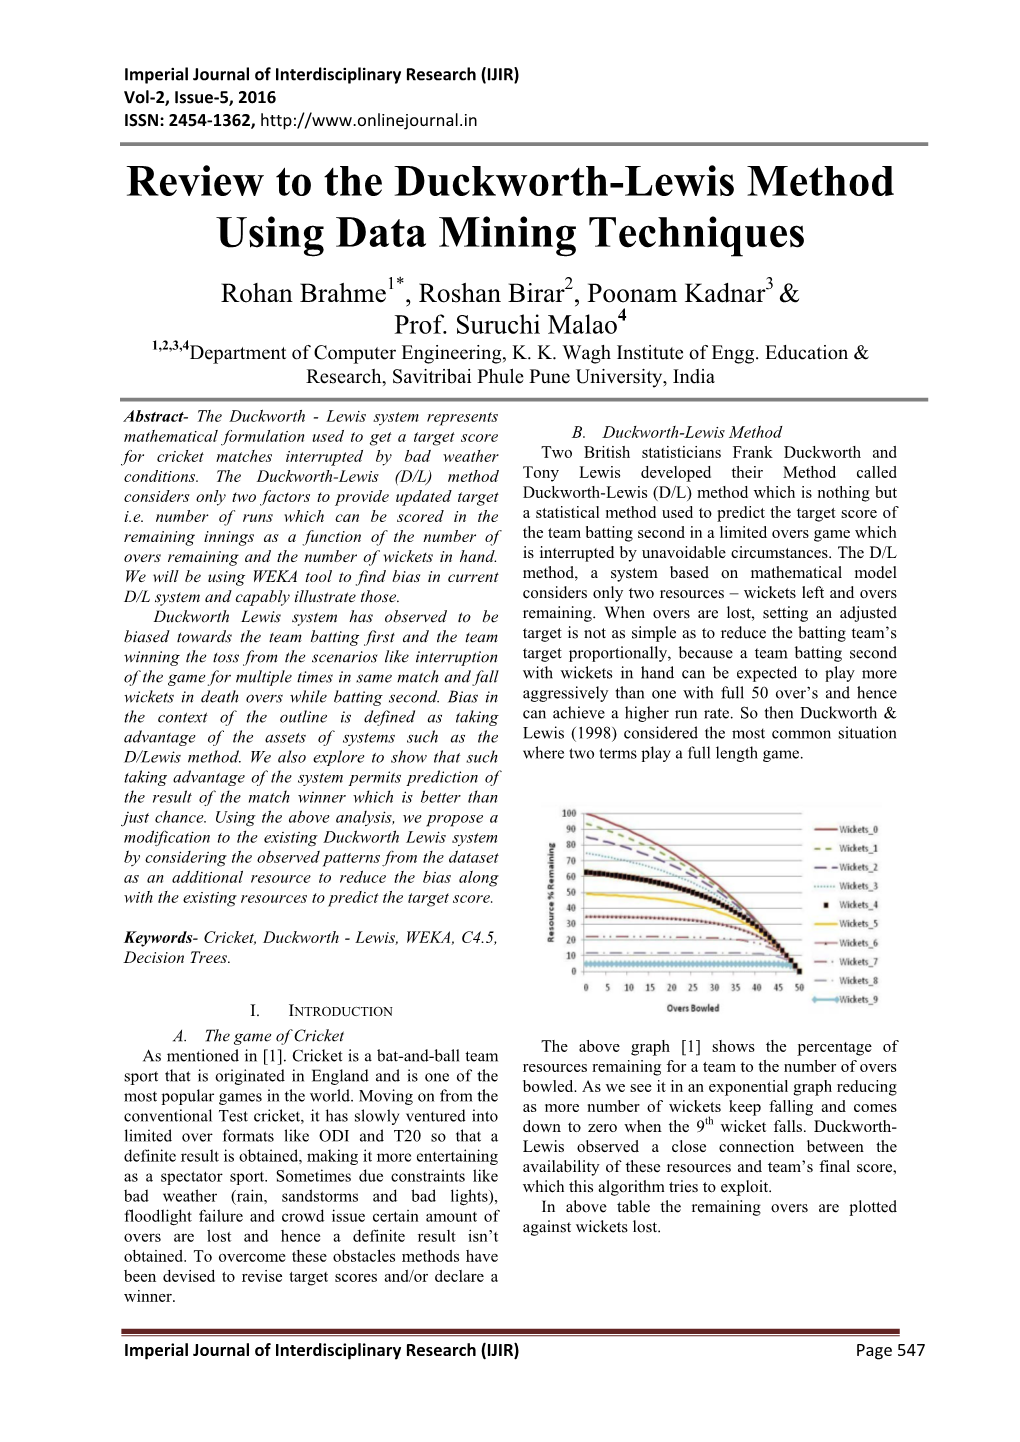 Review to the Duckworth-Lewis Method Using Data Mining Techniques